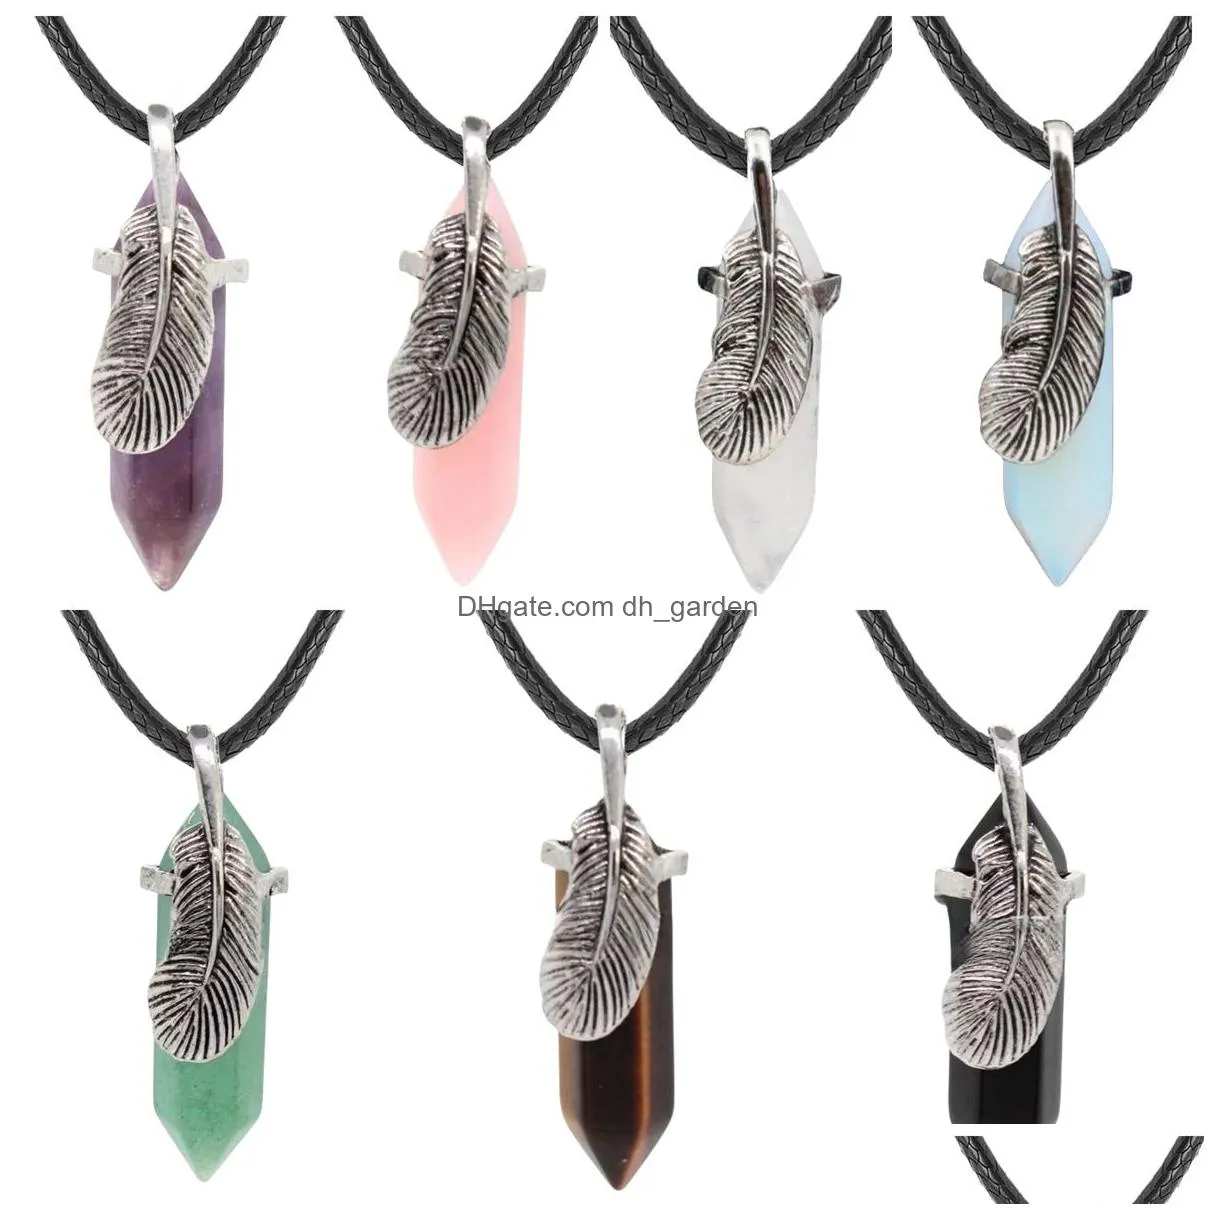 point hexagon prism stone pendant necklace feather wrapped energy healing crystal gemstone pendant necklace